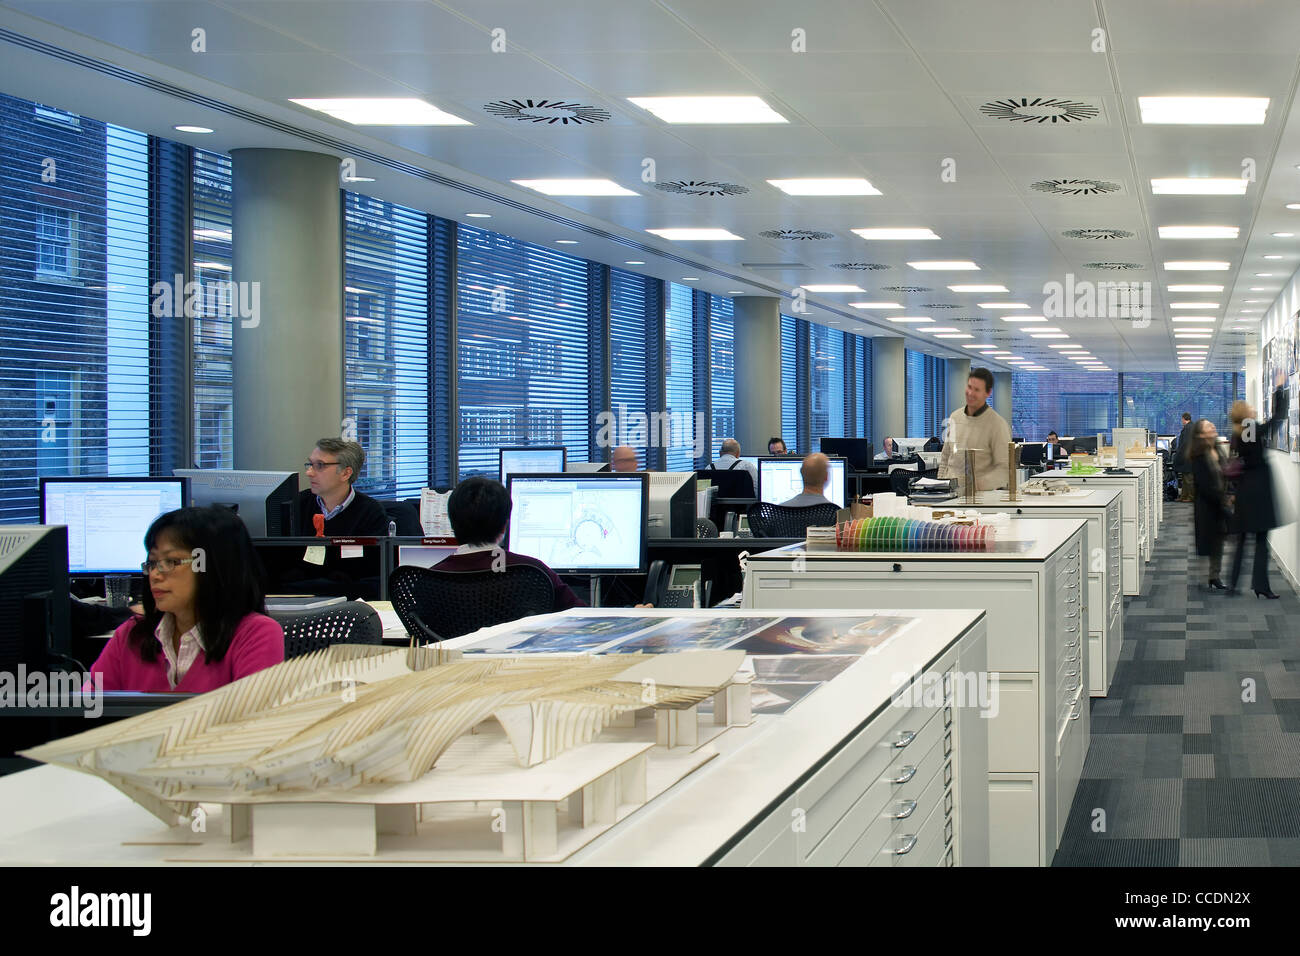 HOK OFFICES HOK ARCHITECTS THE QUBE BUILDING 90 WHITFIELD STREET LONDON UK 2009 INTERIOR SHOT SHOWING PEOPLE WORKING THE OPEN Stock Photo